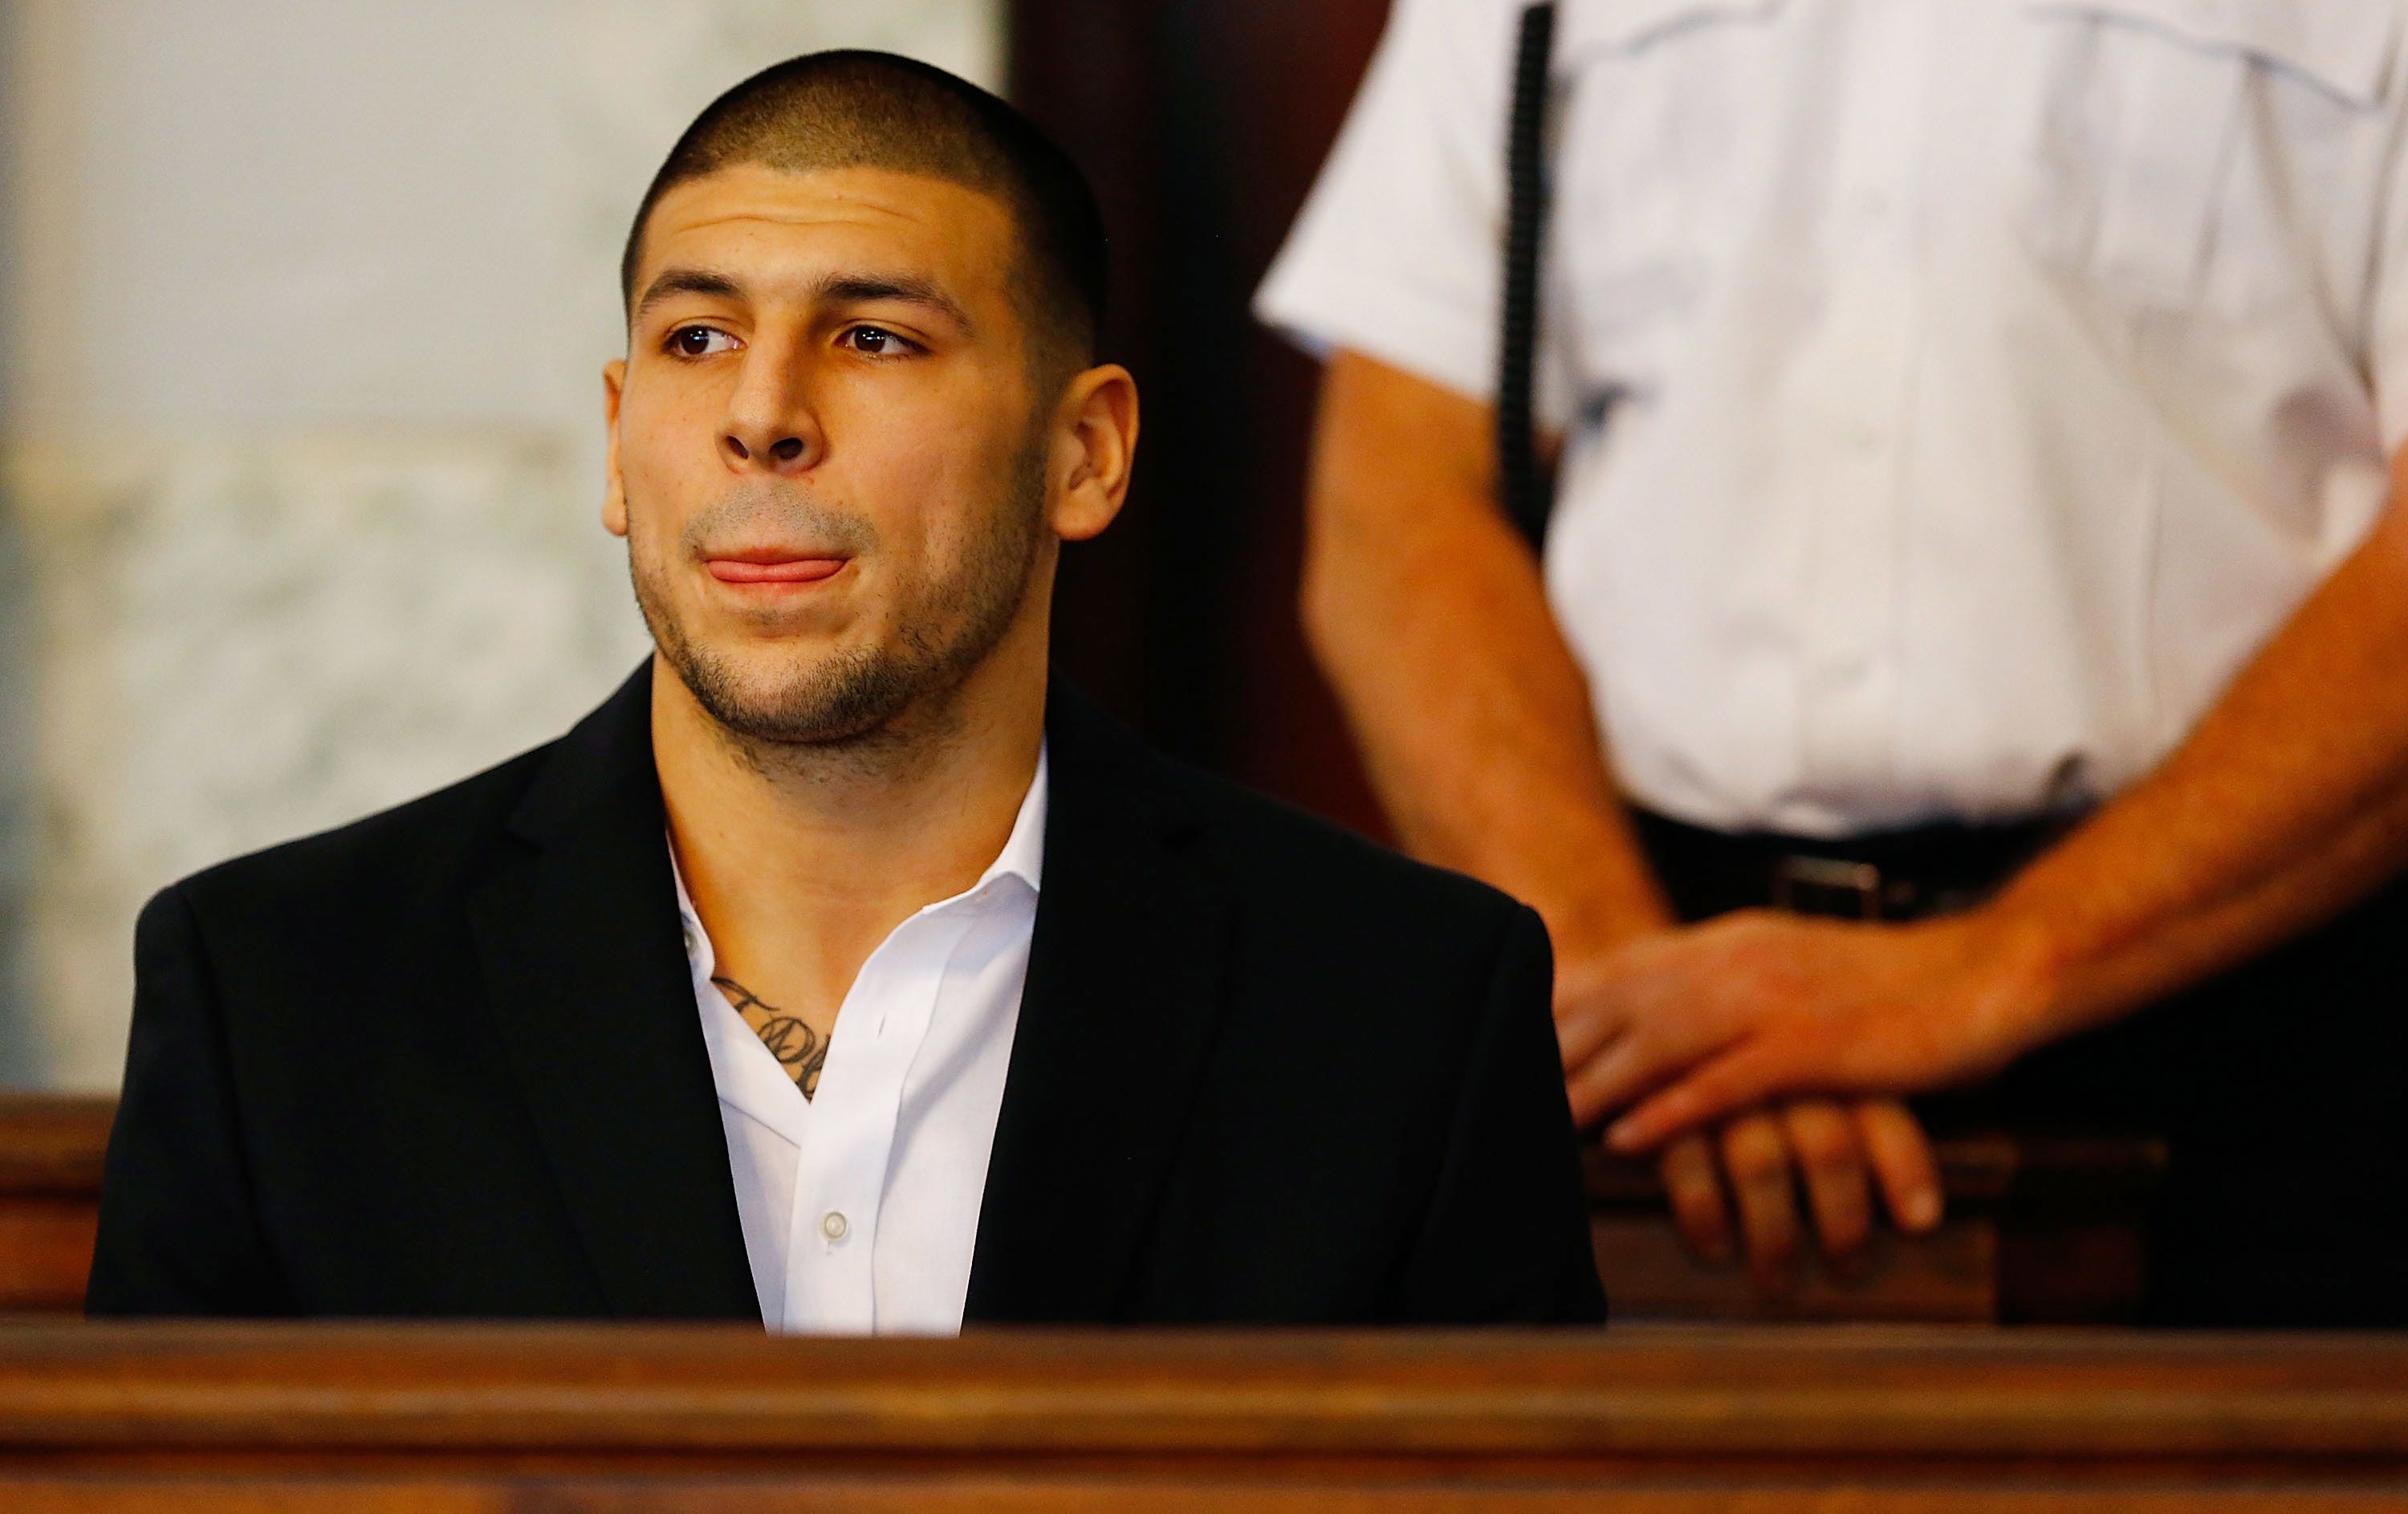 Brother's new book provides fuller picture of Aaron Hernandez